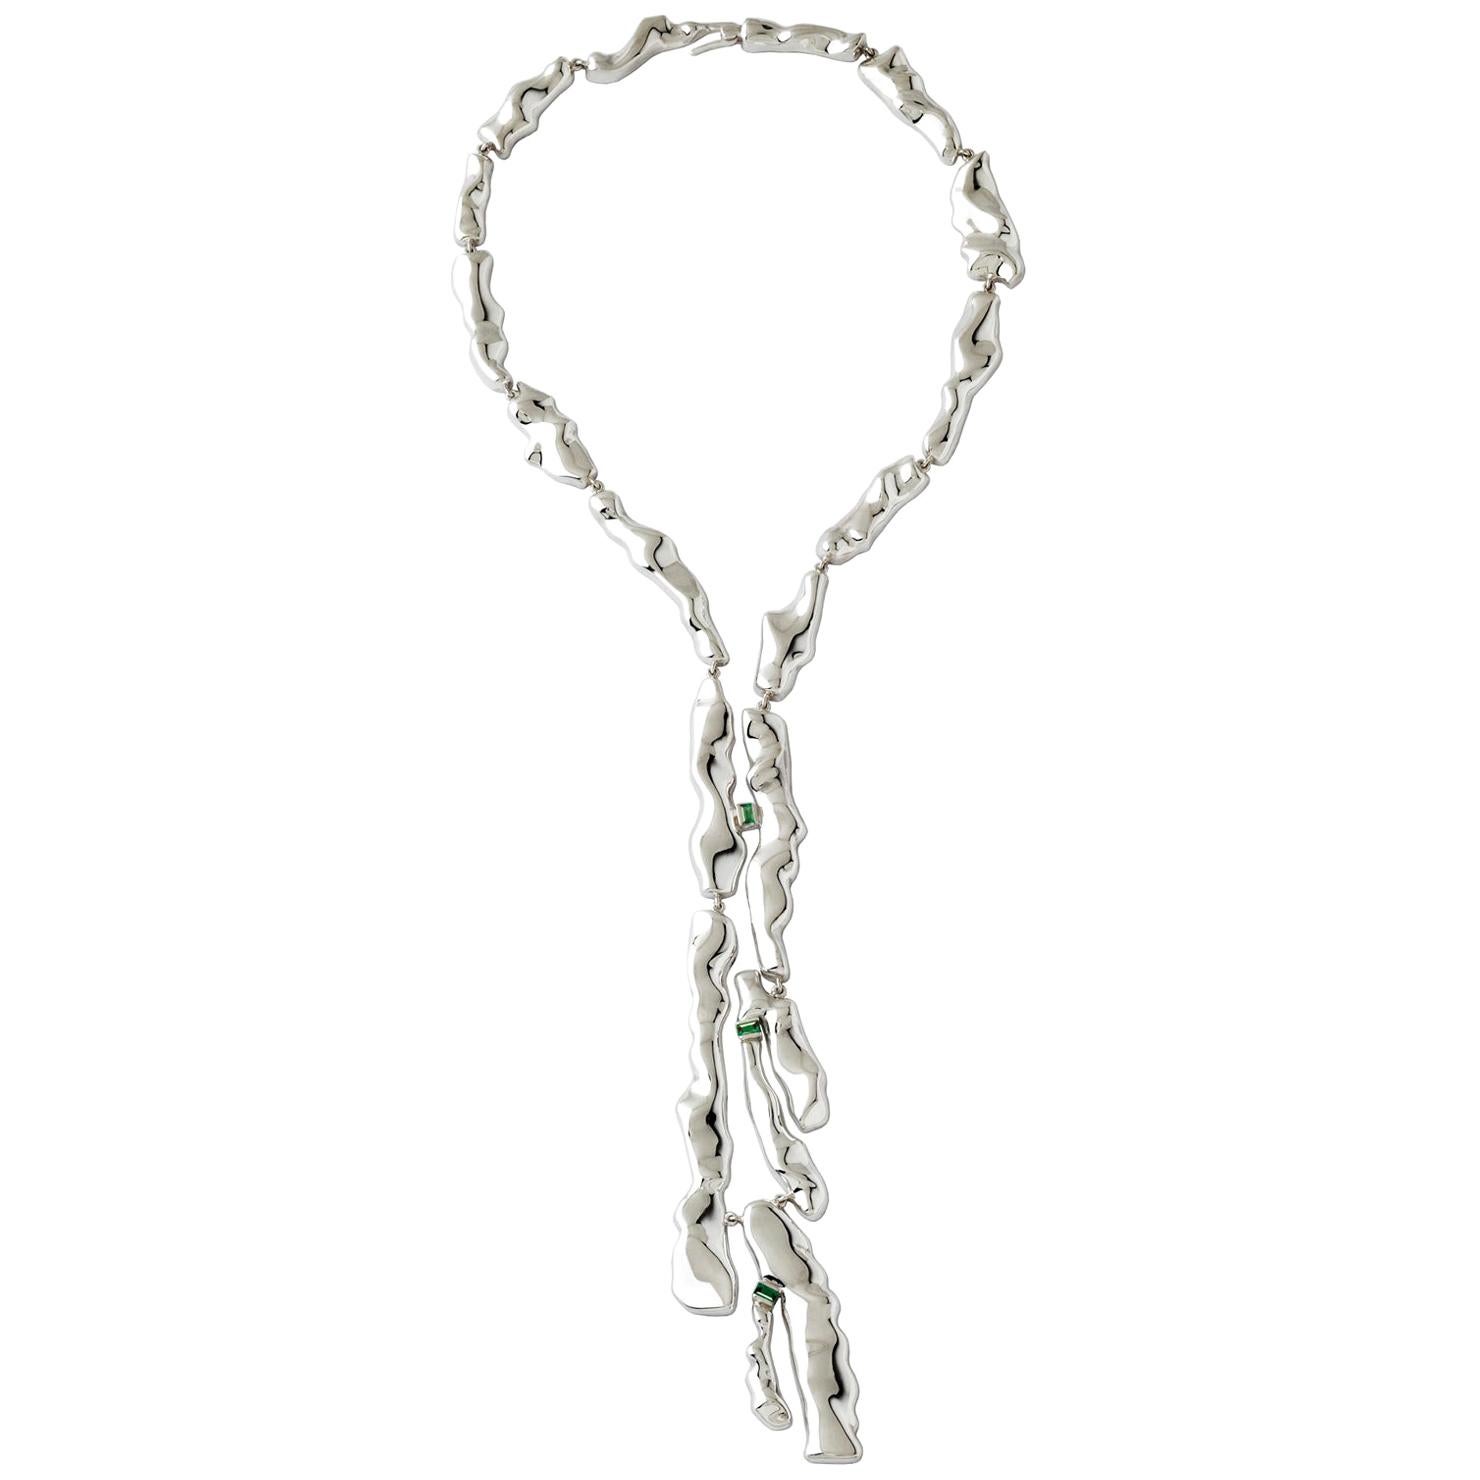 Made by hand in Nathalie Jean's Milan atelier in limited edition, the Mercure Tie drop necklace is composed of 19 elements of varying dimensions in rhodium plated sterling silver. Clever hidden links allow the pieces to drape nicely around the neck